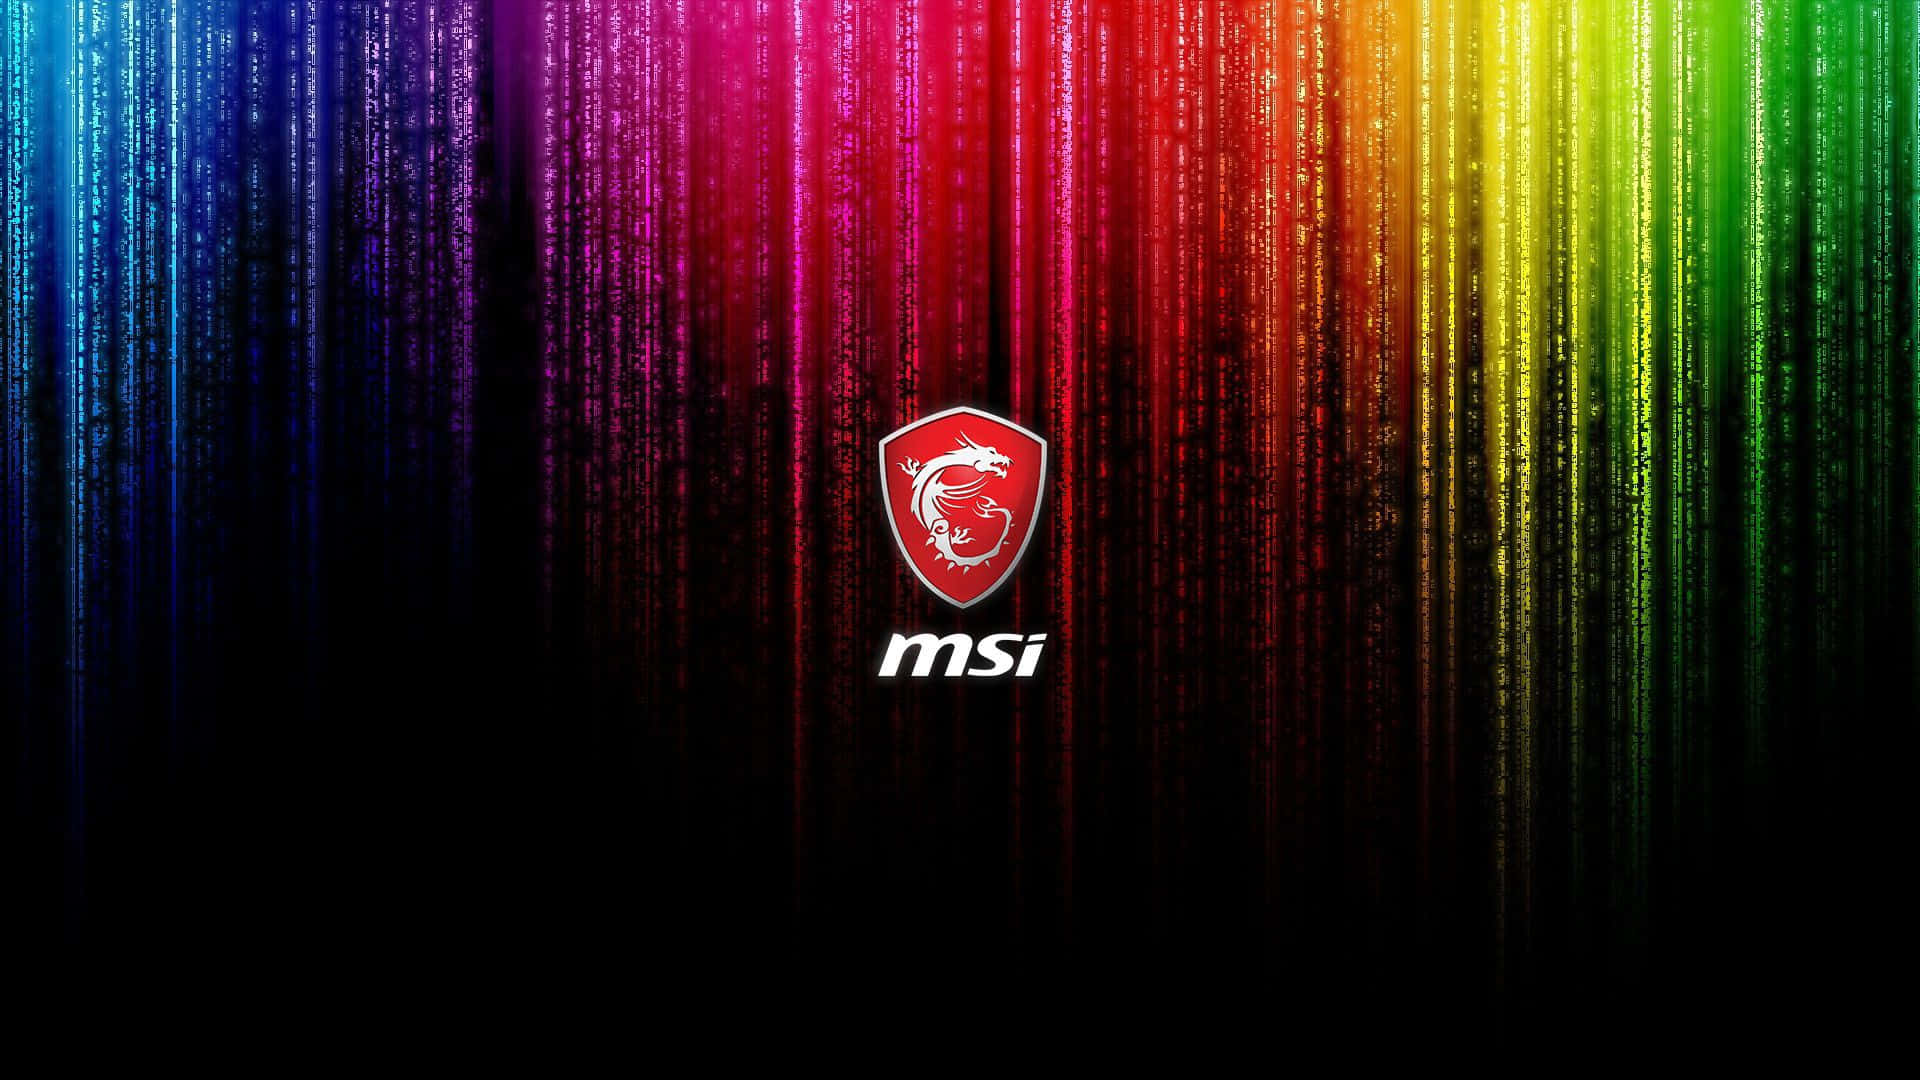 MSI to the moon.